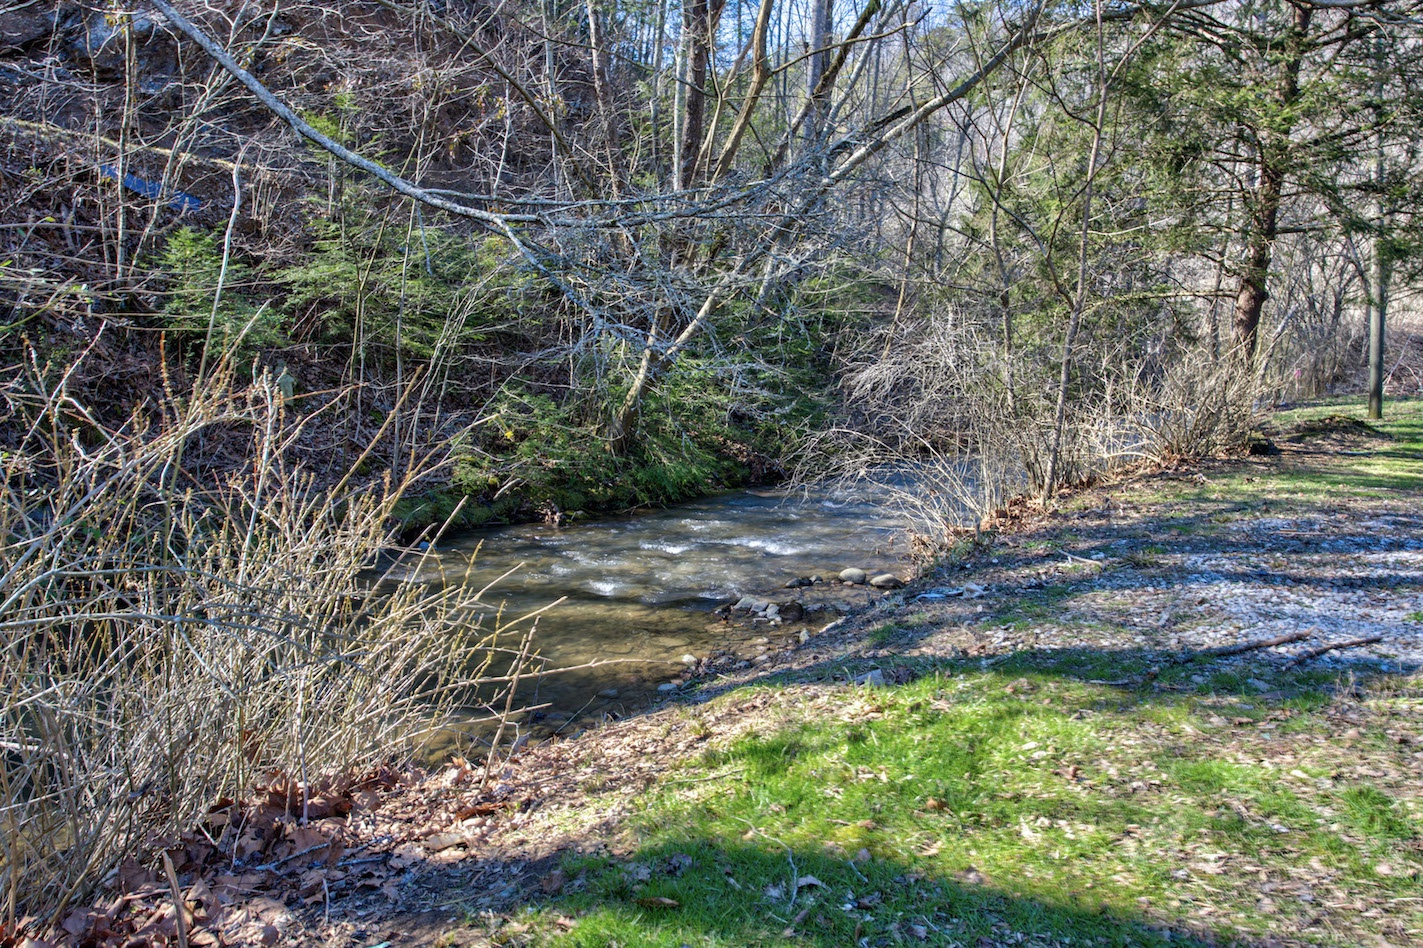 Indulge in a leisurely afternoon stroll beside the stream